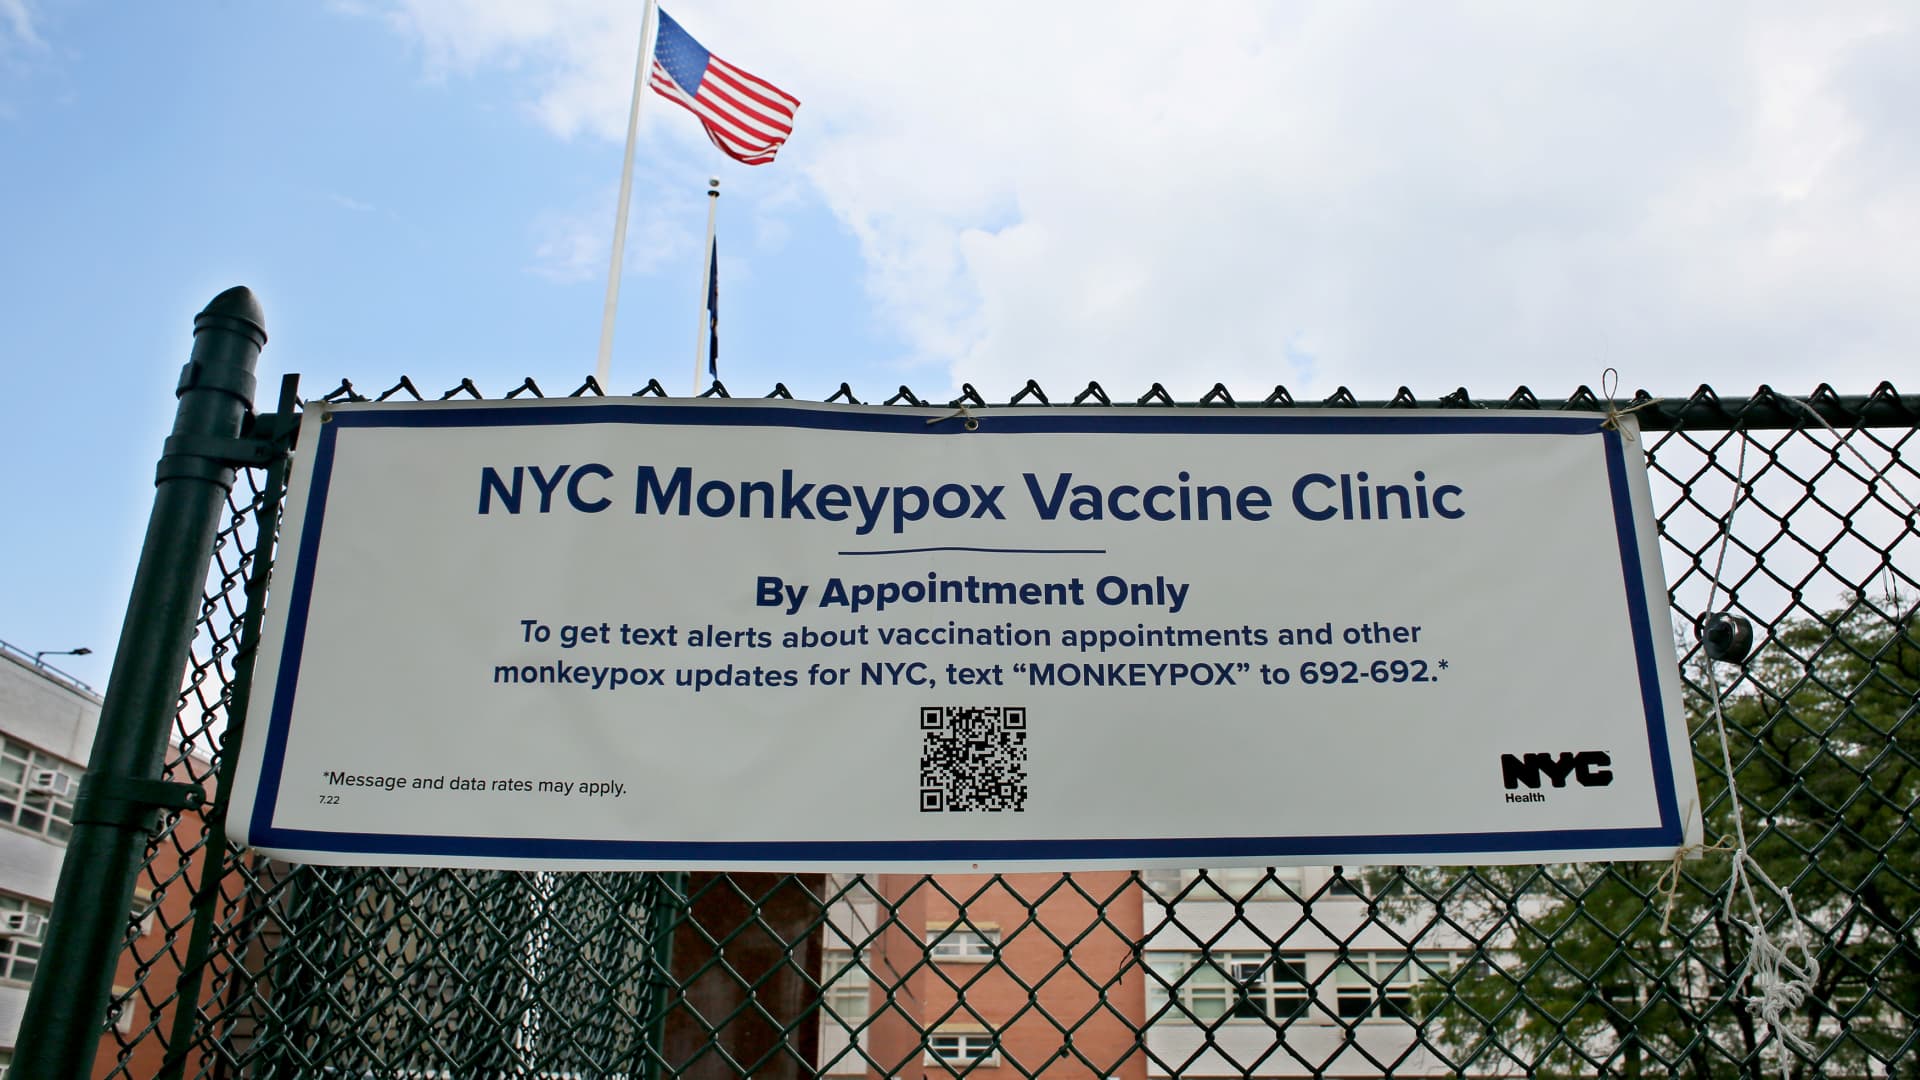 CDC cautiously optimistic that monkeypox outbreak might be slowing as cases fall in major cities